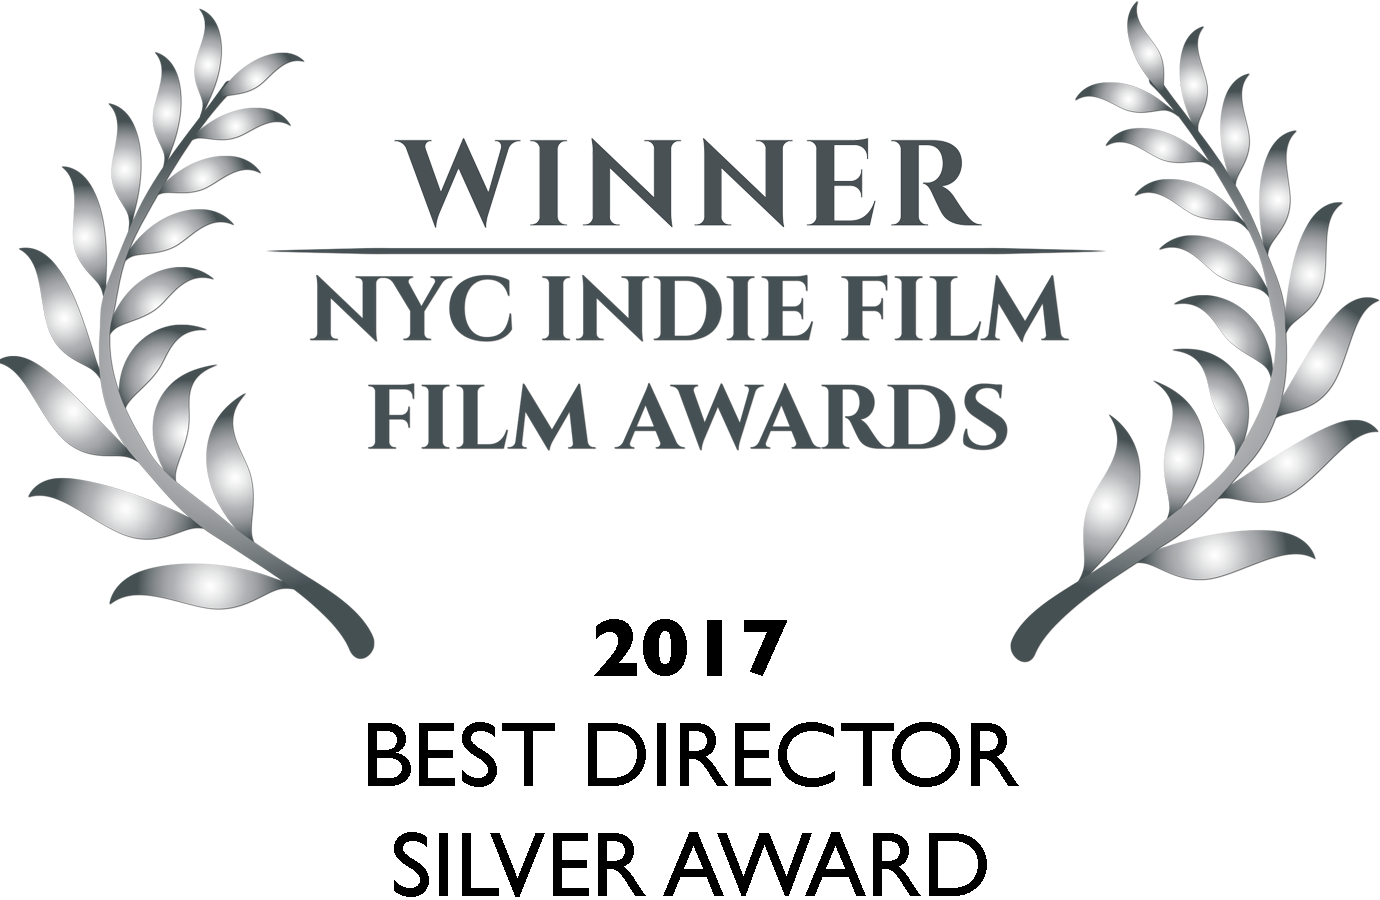 Sofia Wellman - Whats Love Got To Do With It - Film by Sofia Wellman - NYC Indie Film Awards - Best Director - Silver Award - 2017